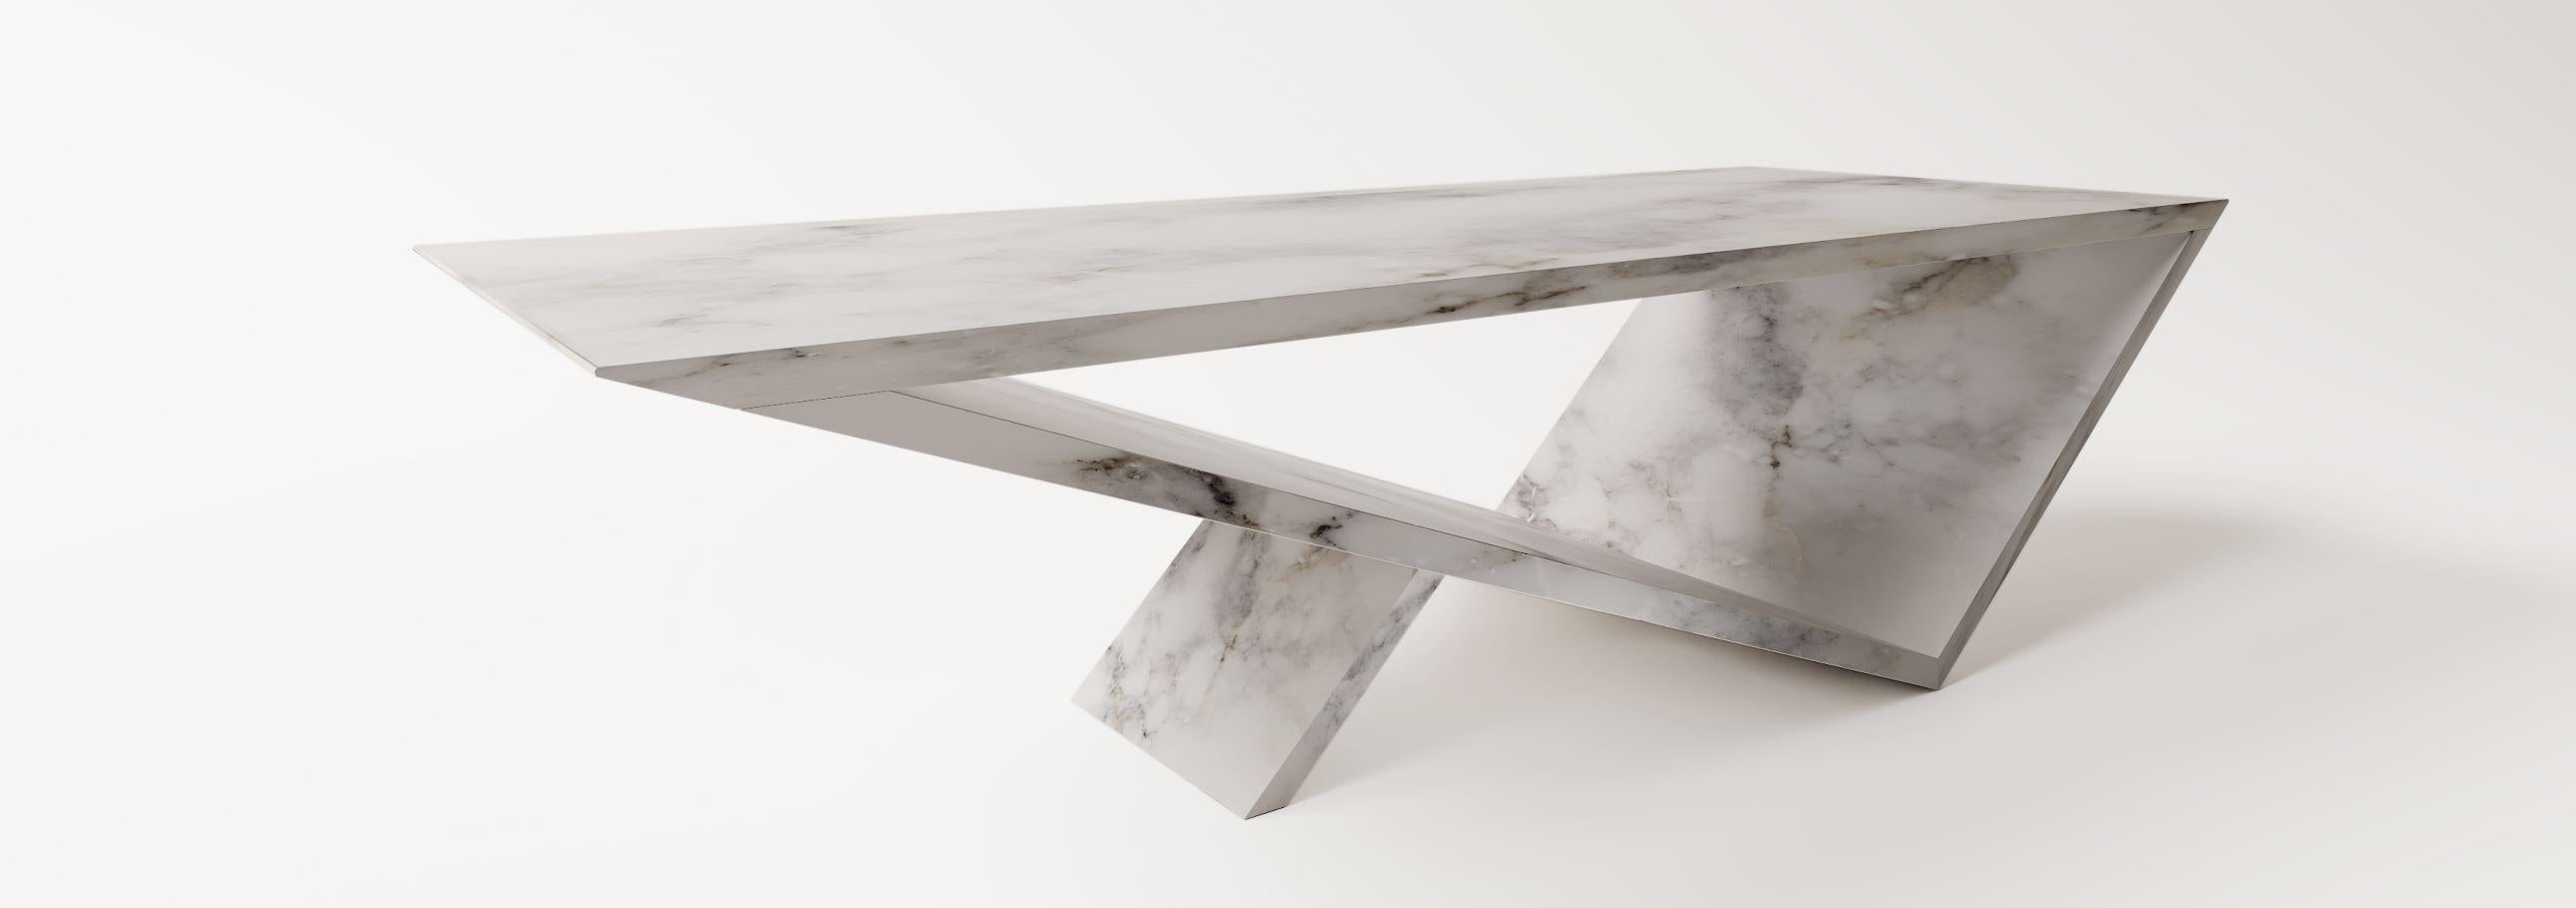 American Time/Space Portal Coffee Table in Calacatta Marble by Neal Aronowitz Design For Sale